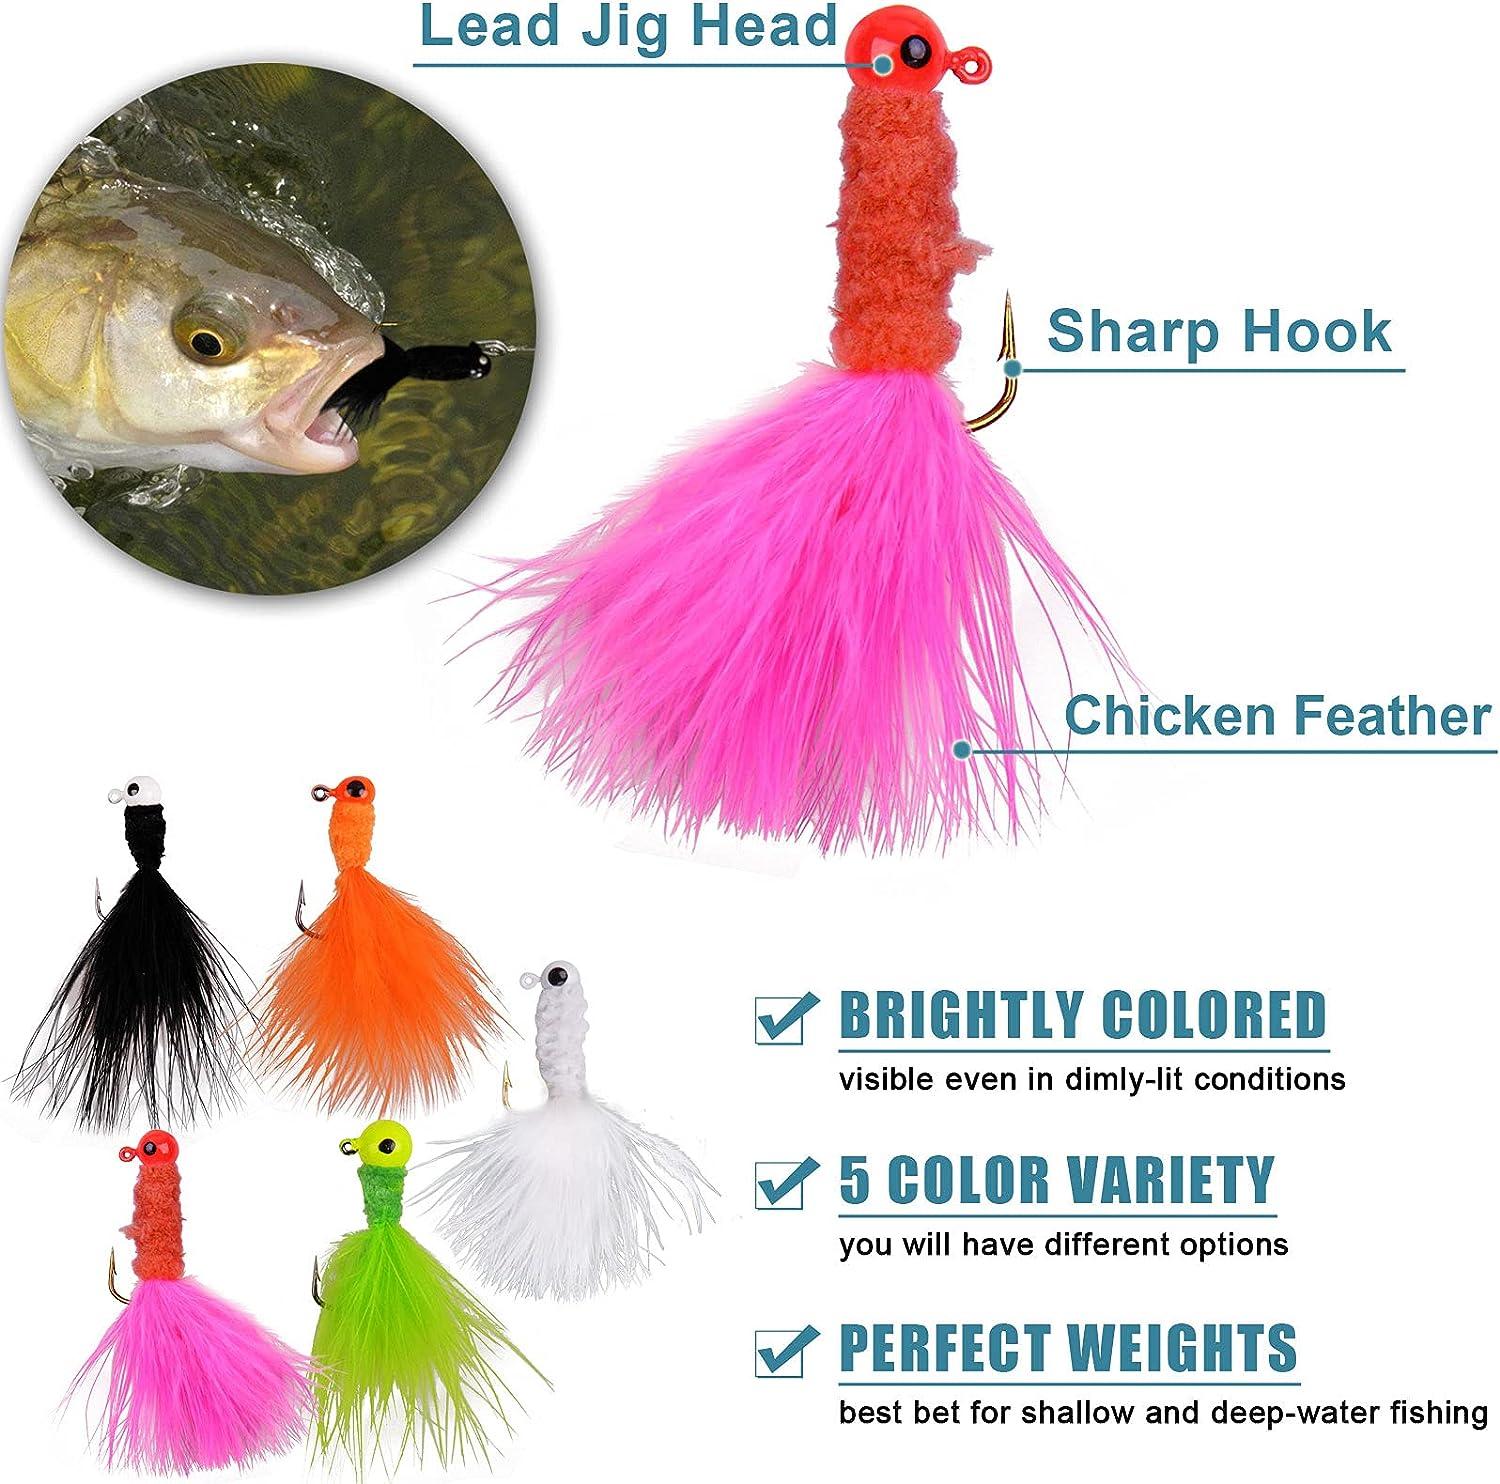 Goture Round Fishing Jig Heads, Lead Jig Head Hooks for Saltwater